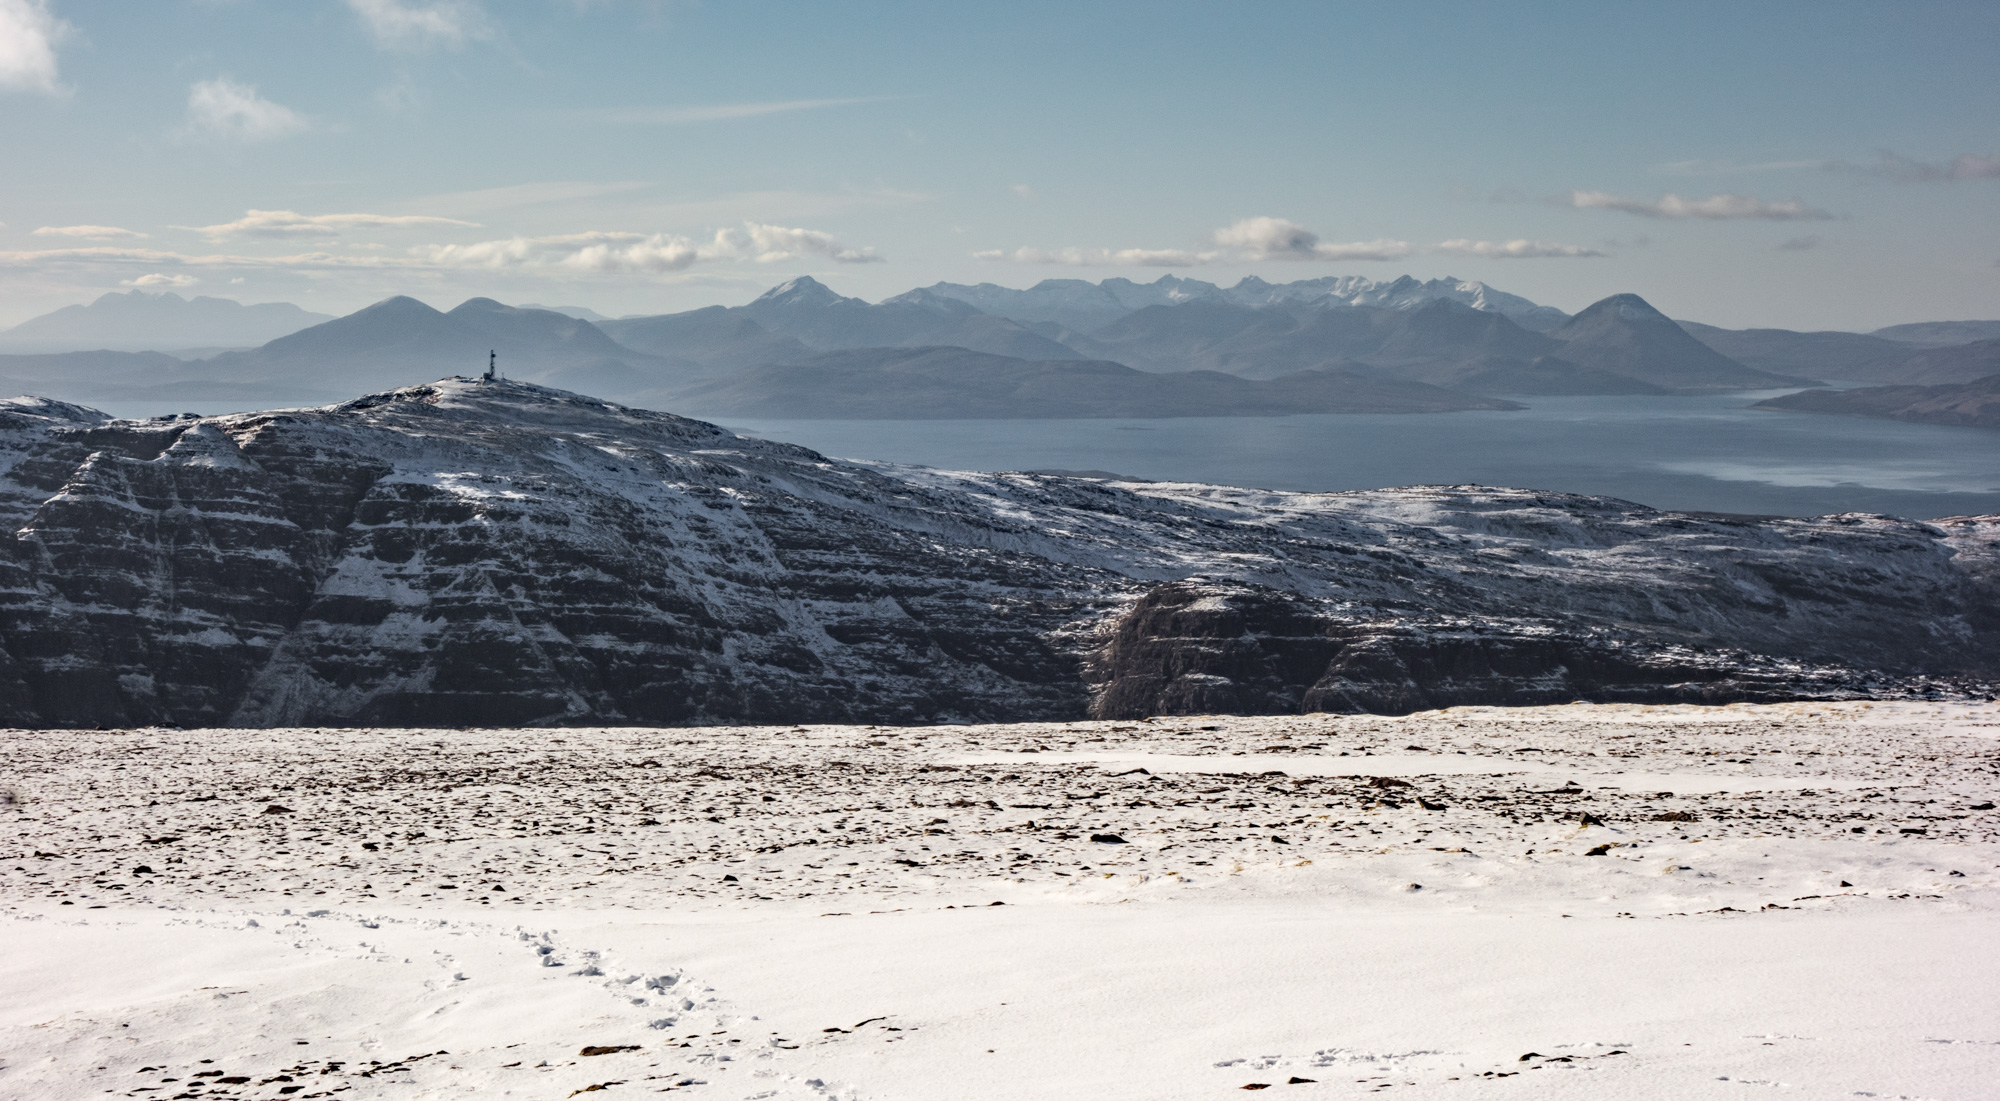 Spectacular views greeted us from the summit plateau across the Inner Sound to the Isle of Skye and a snowy Black Cuillin